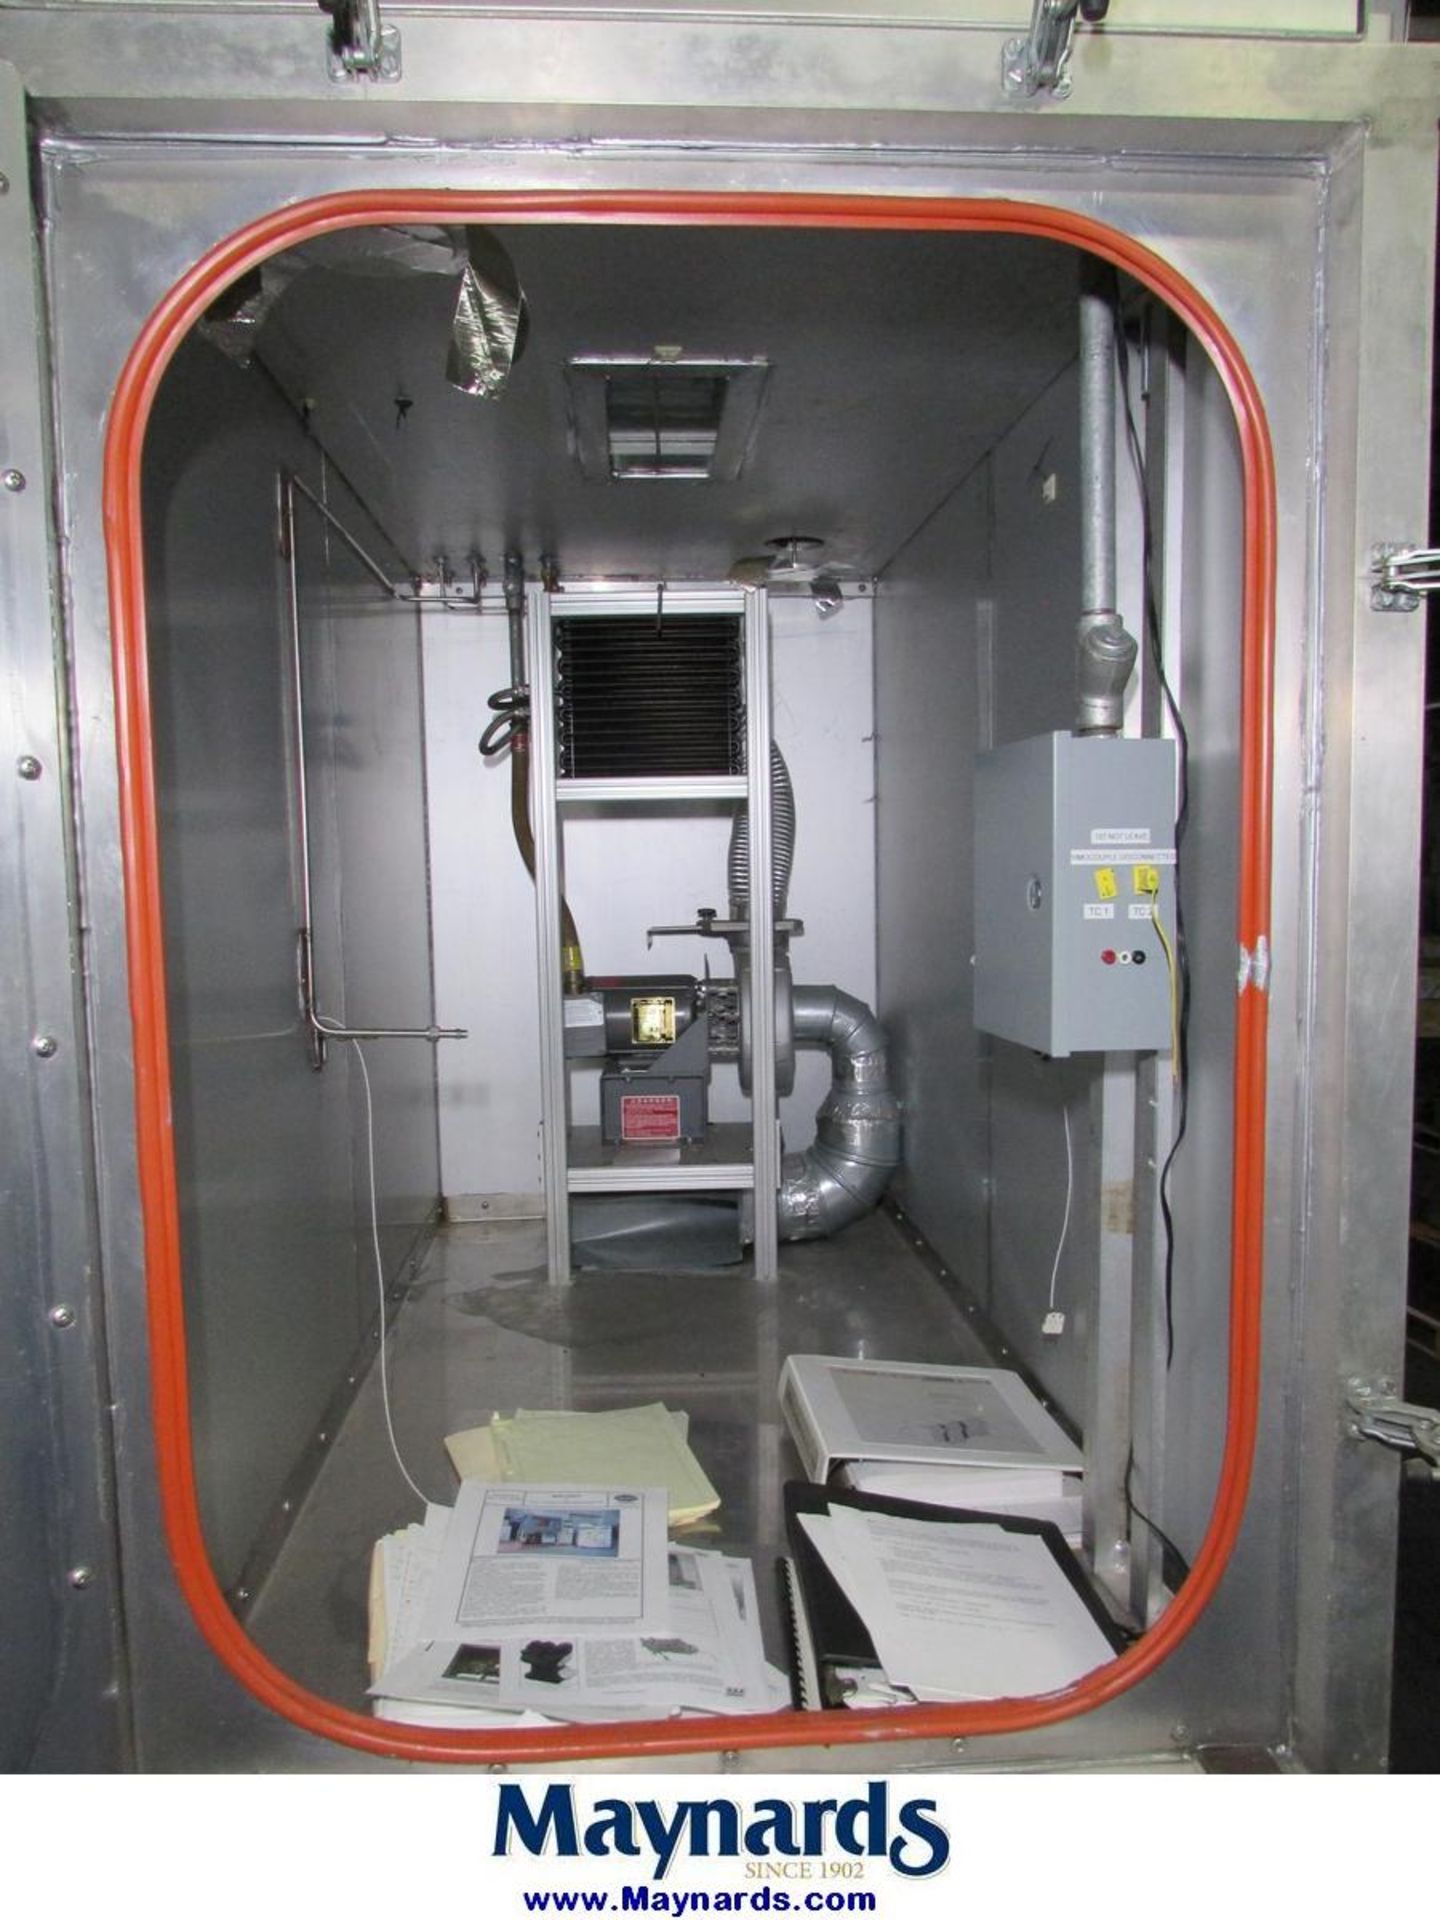 APS Mini-SHED Fuel Evaporation Lab Test Chamber - Image 3 of 9